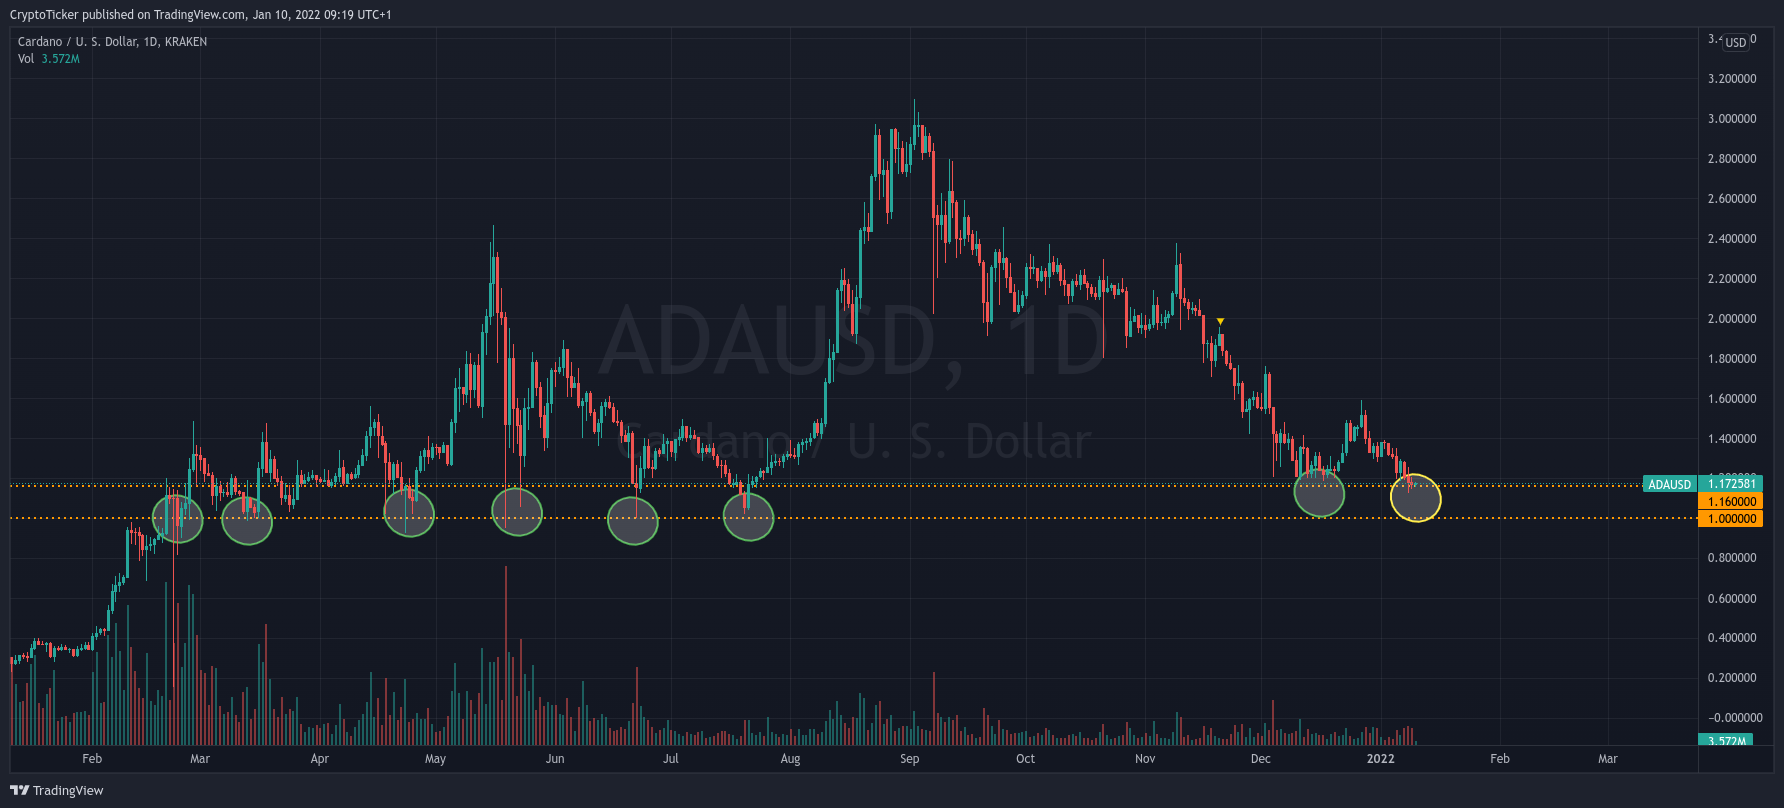 ADA/USD 1-day chart showing the strong support area of ADA - Cardano Price Prediction